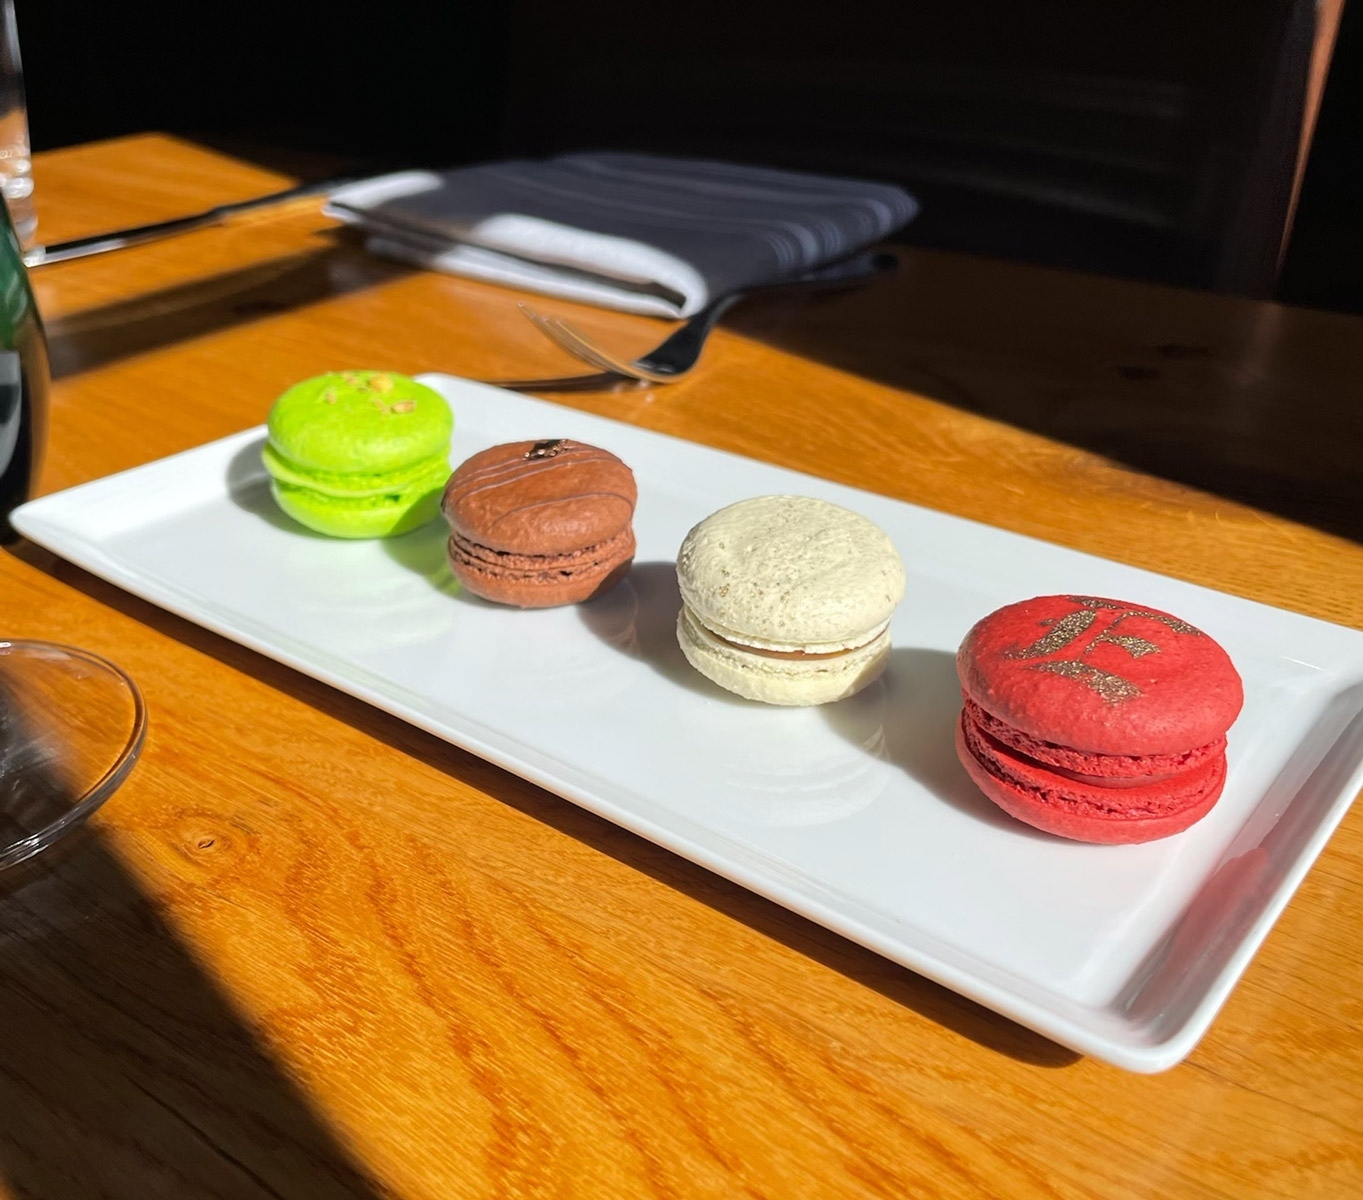 Looking for something sweet? Try the macarons from @almonddustpatisserie! We always have a rotating assortment of flavors. Tonight we have Pistachio, Dulce de Leche, Red Velvet, and Mississippi Mud<br/>
<br/>
<br/>
<br/>
#eatlocal #supportlocal #dessert #macaron #macaroon #southofbroad #charleston #almonddustpatisserie #sweettooth